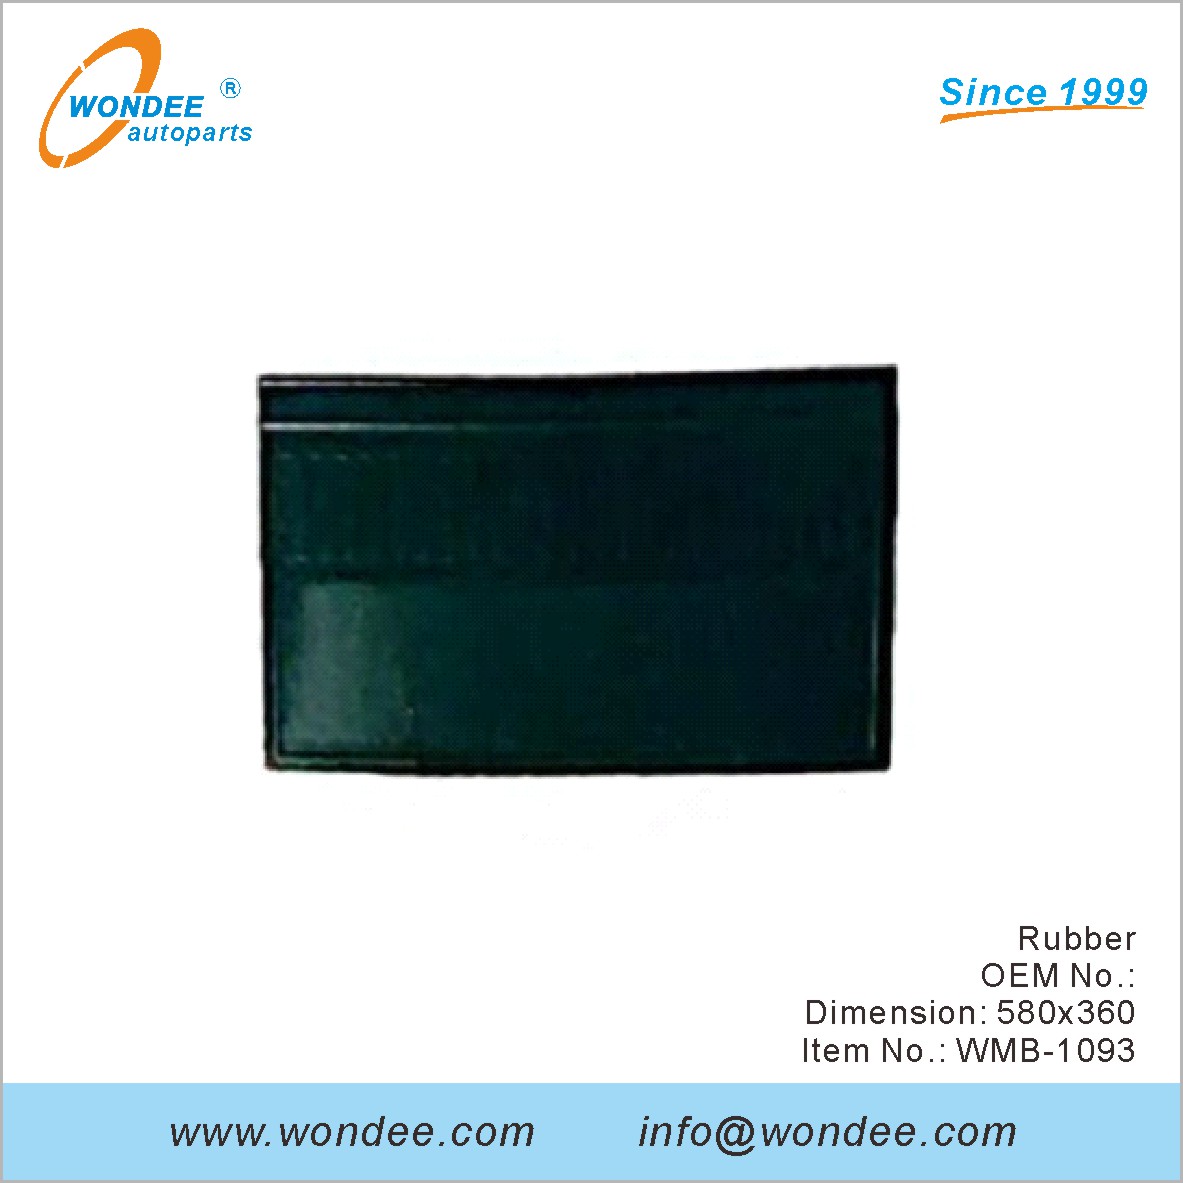 Rubber OEM for Benz from WONDEE